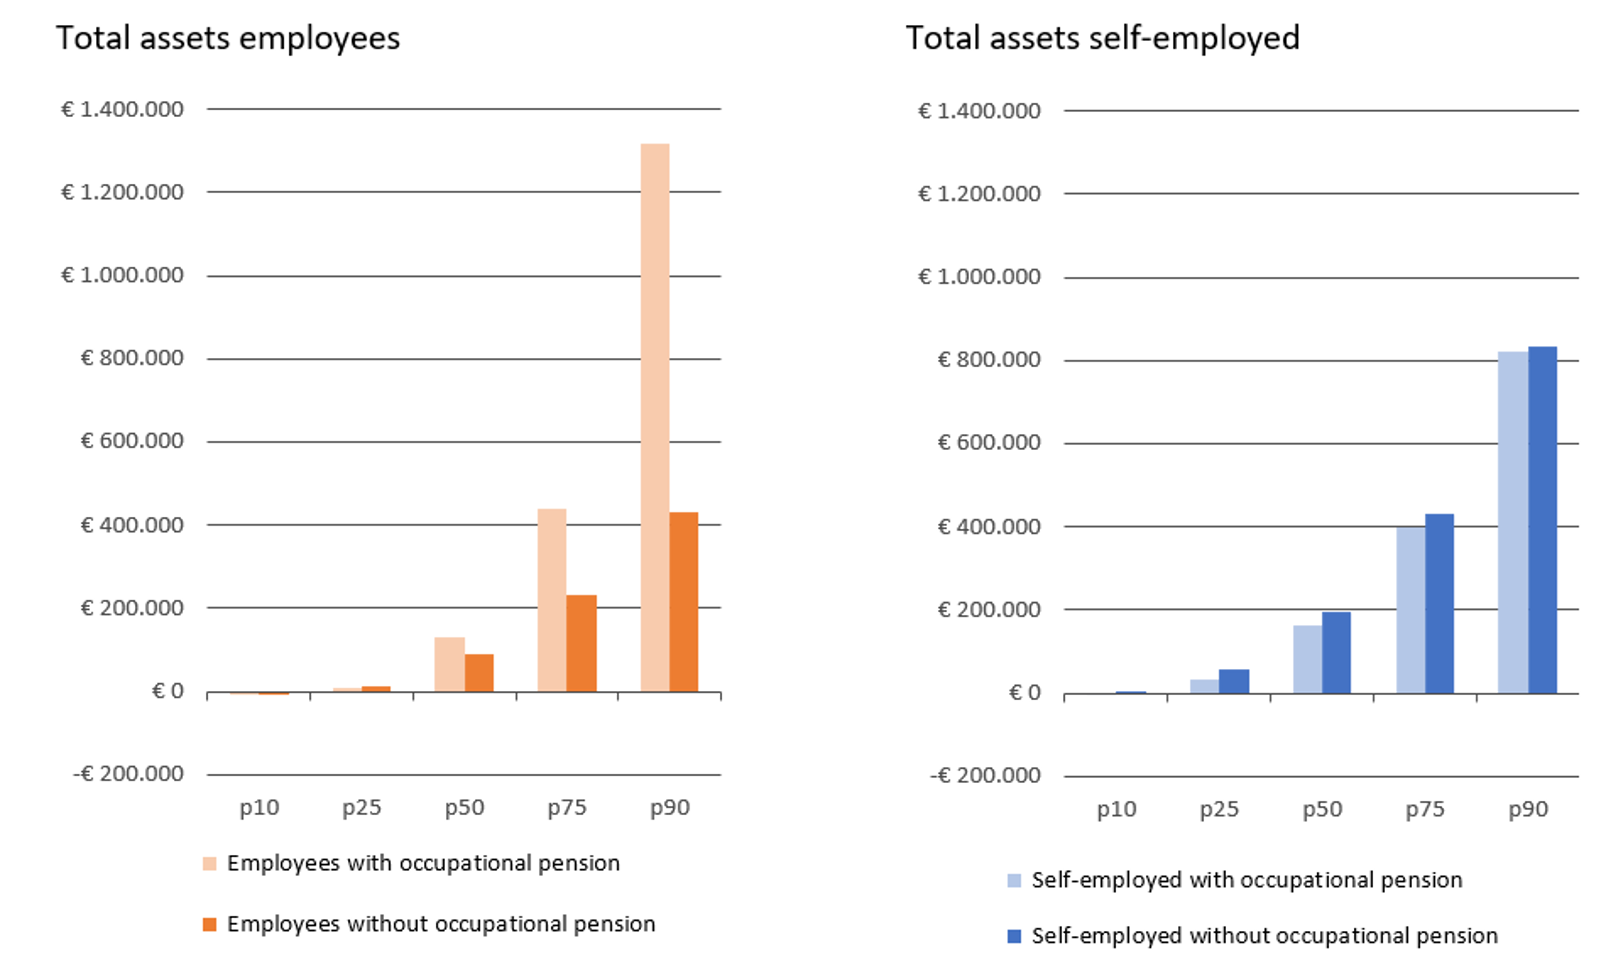 Net total assets by type of employment in 2020